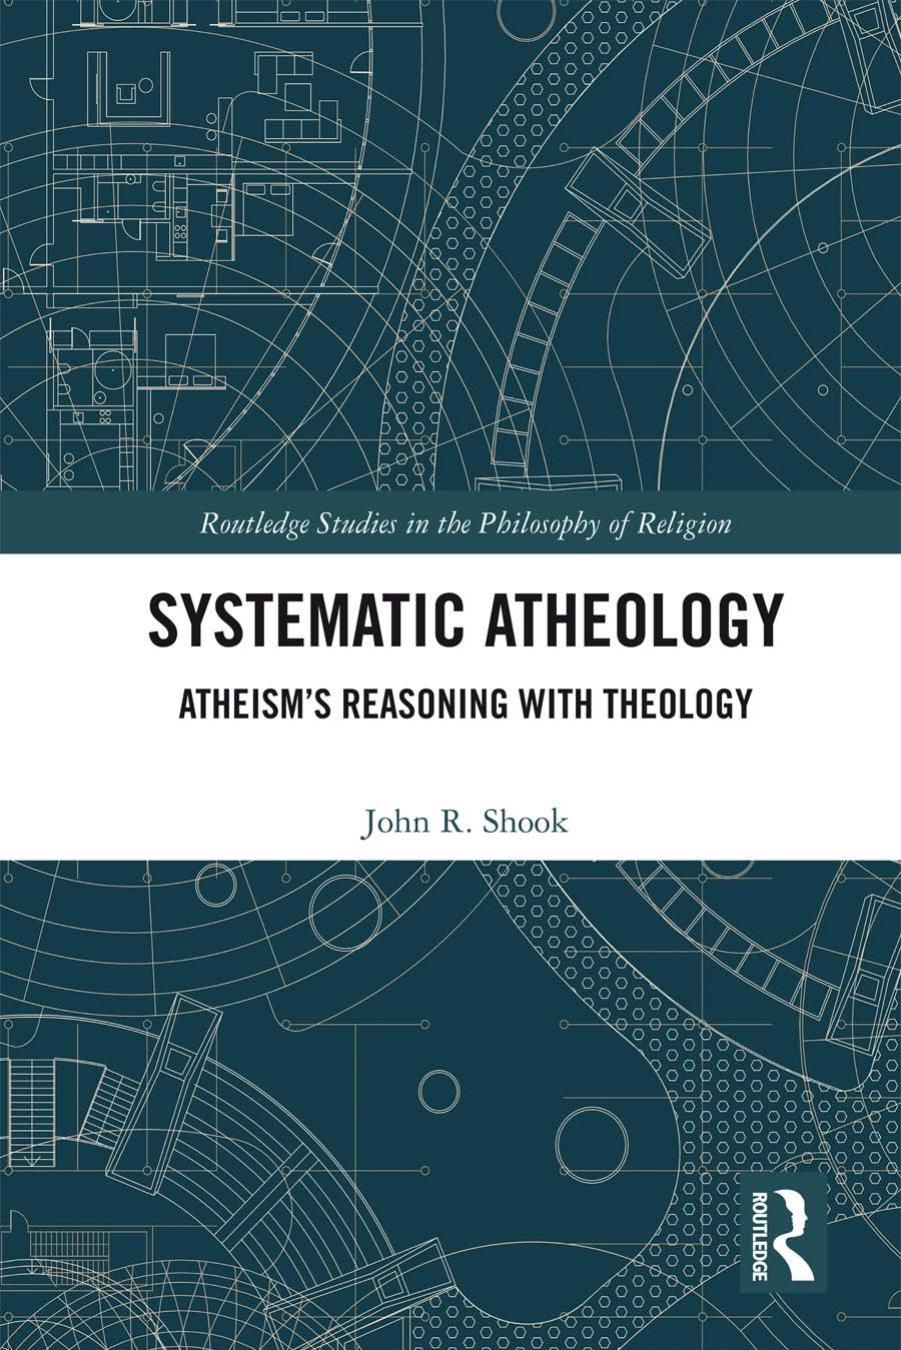 Systematic Atheology: Atheism's Reasoning With Theology